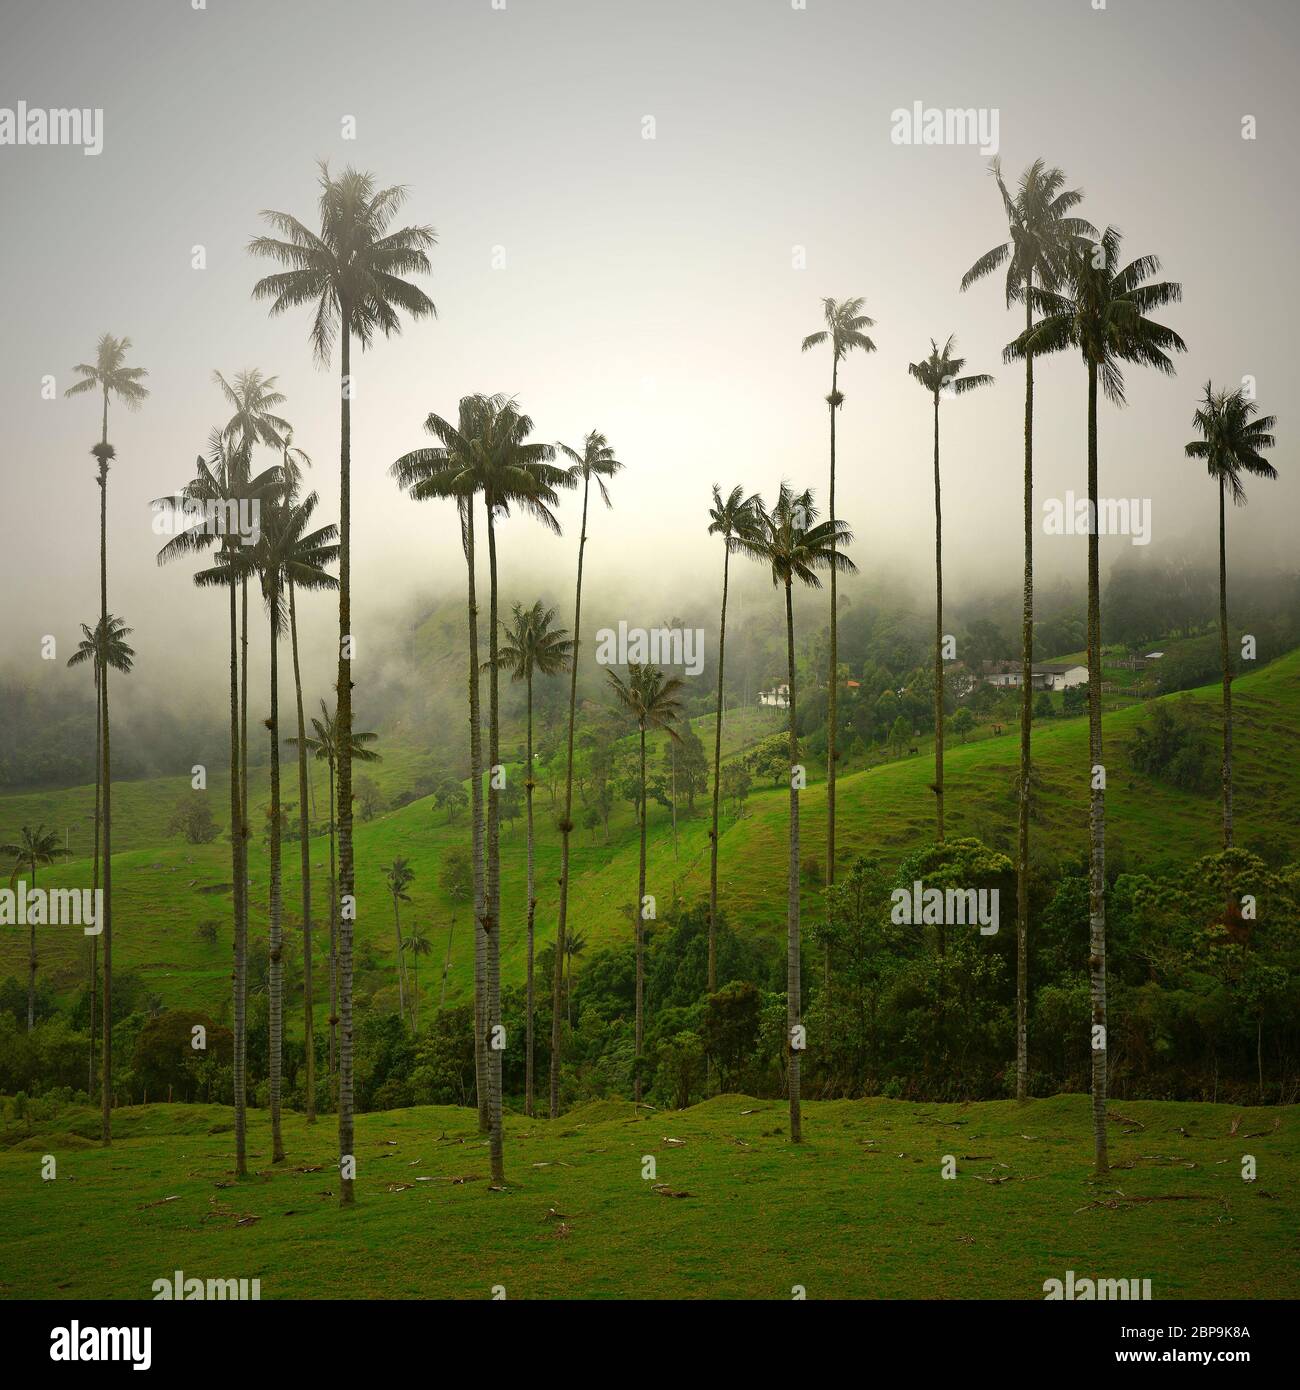 Wax palm trees (Ceroxylon quindiuense) in the morning mist of the Cocora valley near Armenia and Salento, Colombia. Stock Photo